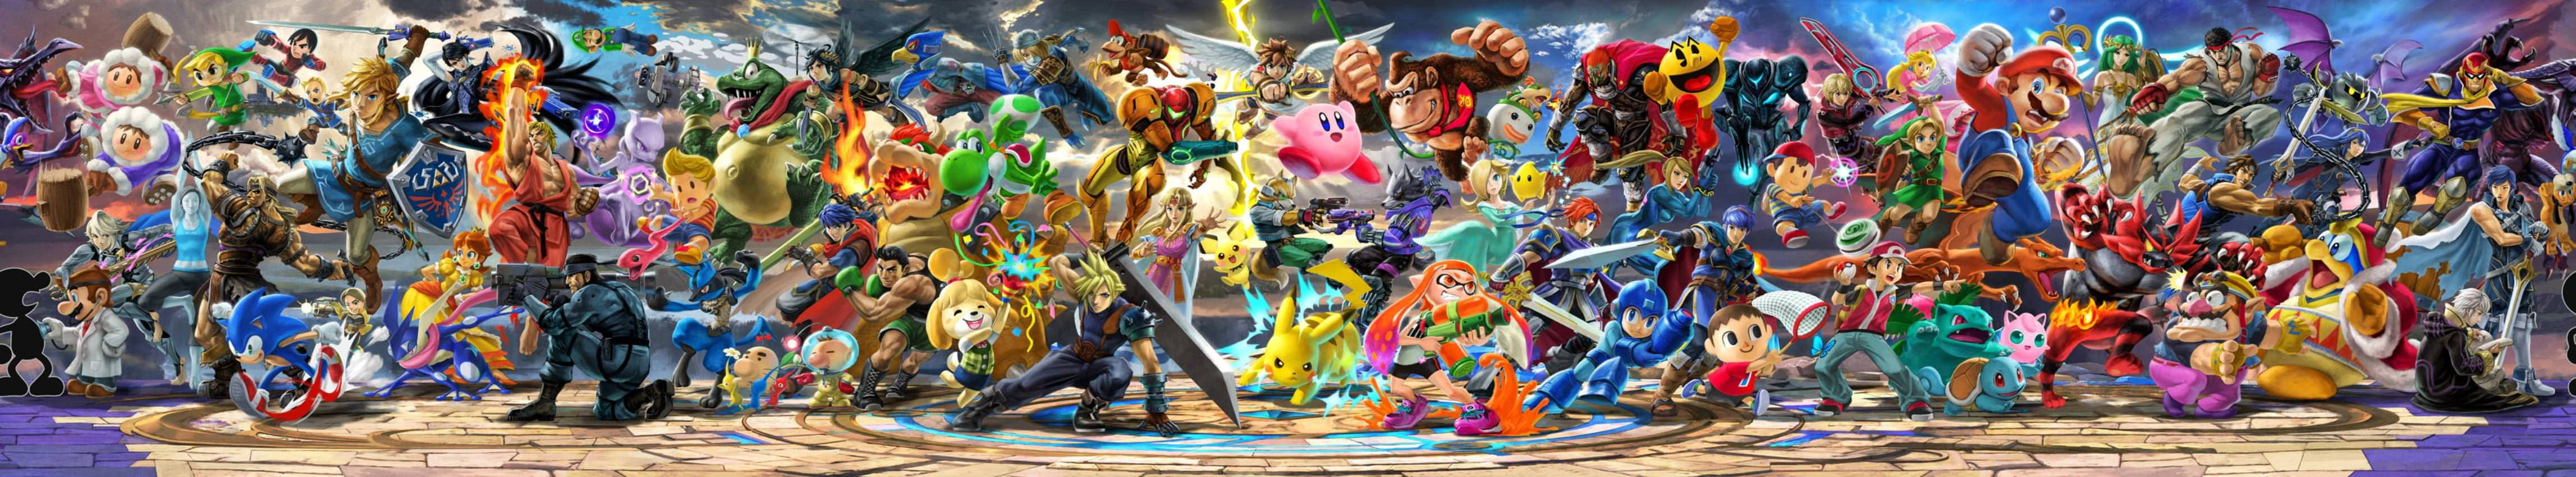 Smash Ultimate In Wide Angle Background